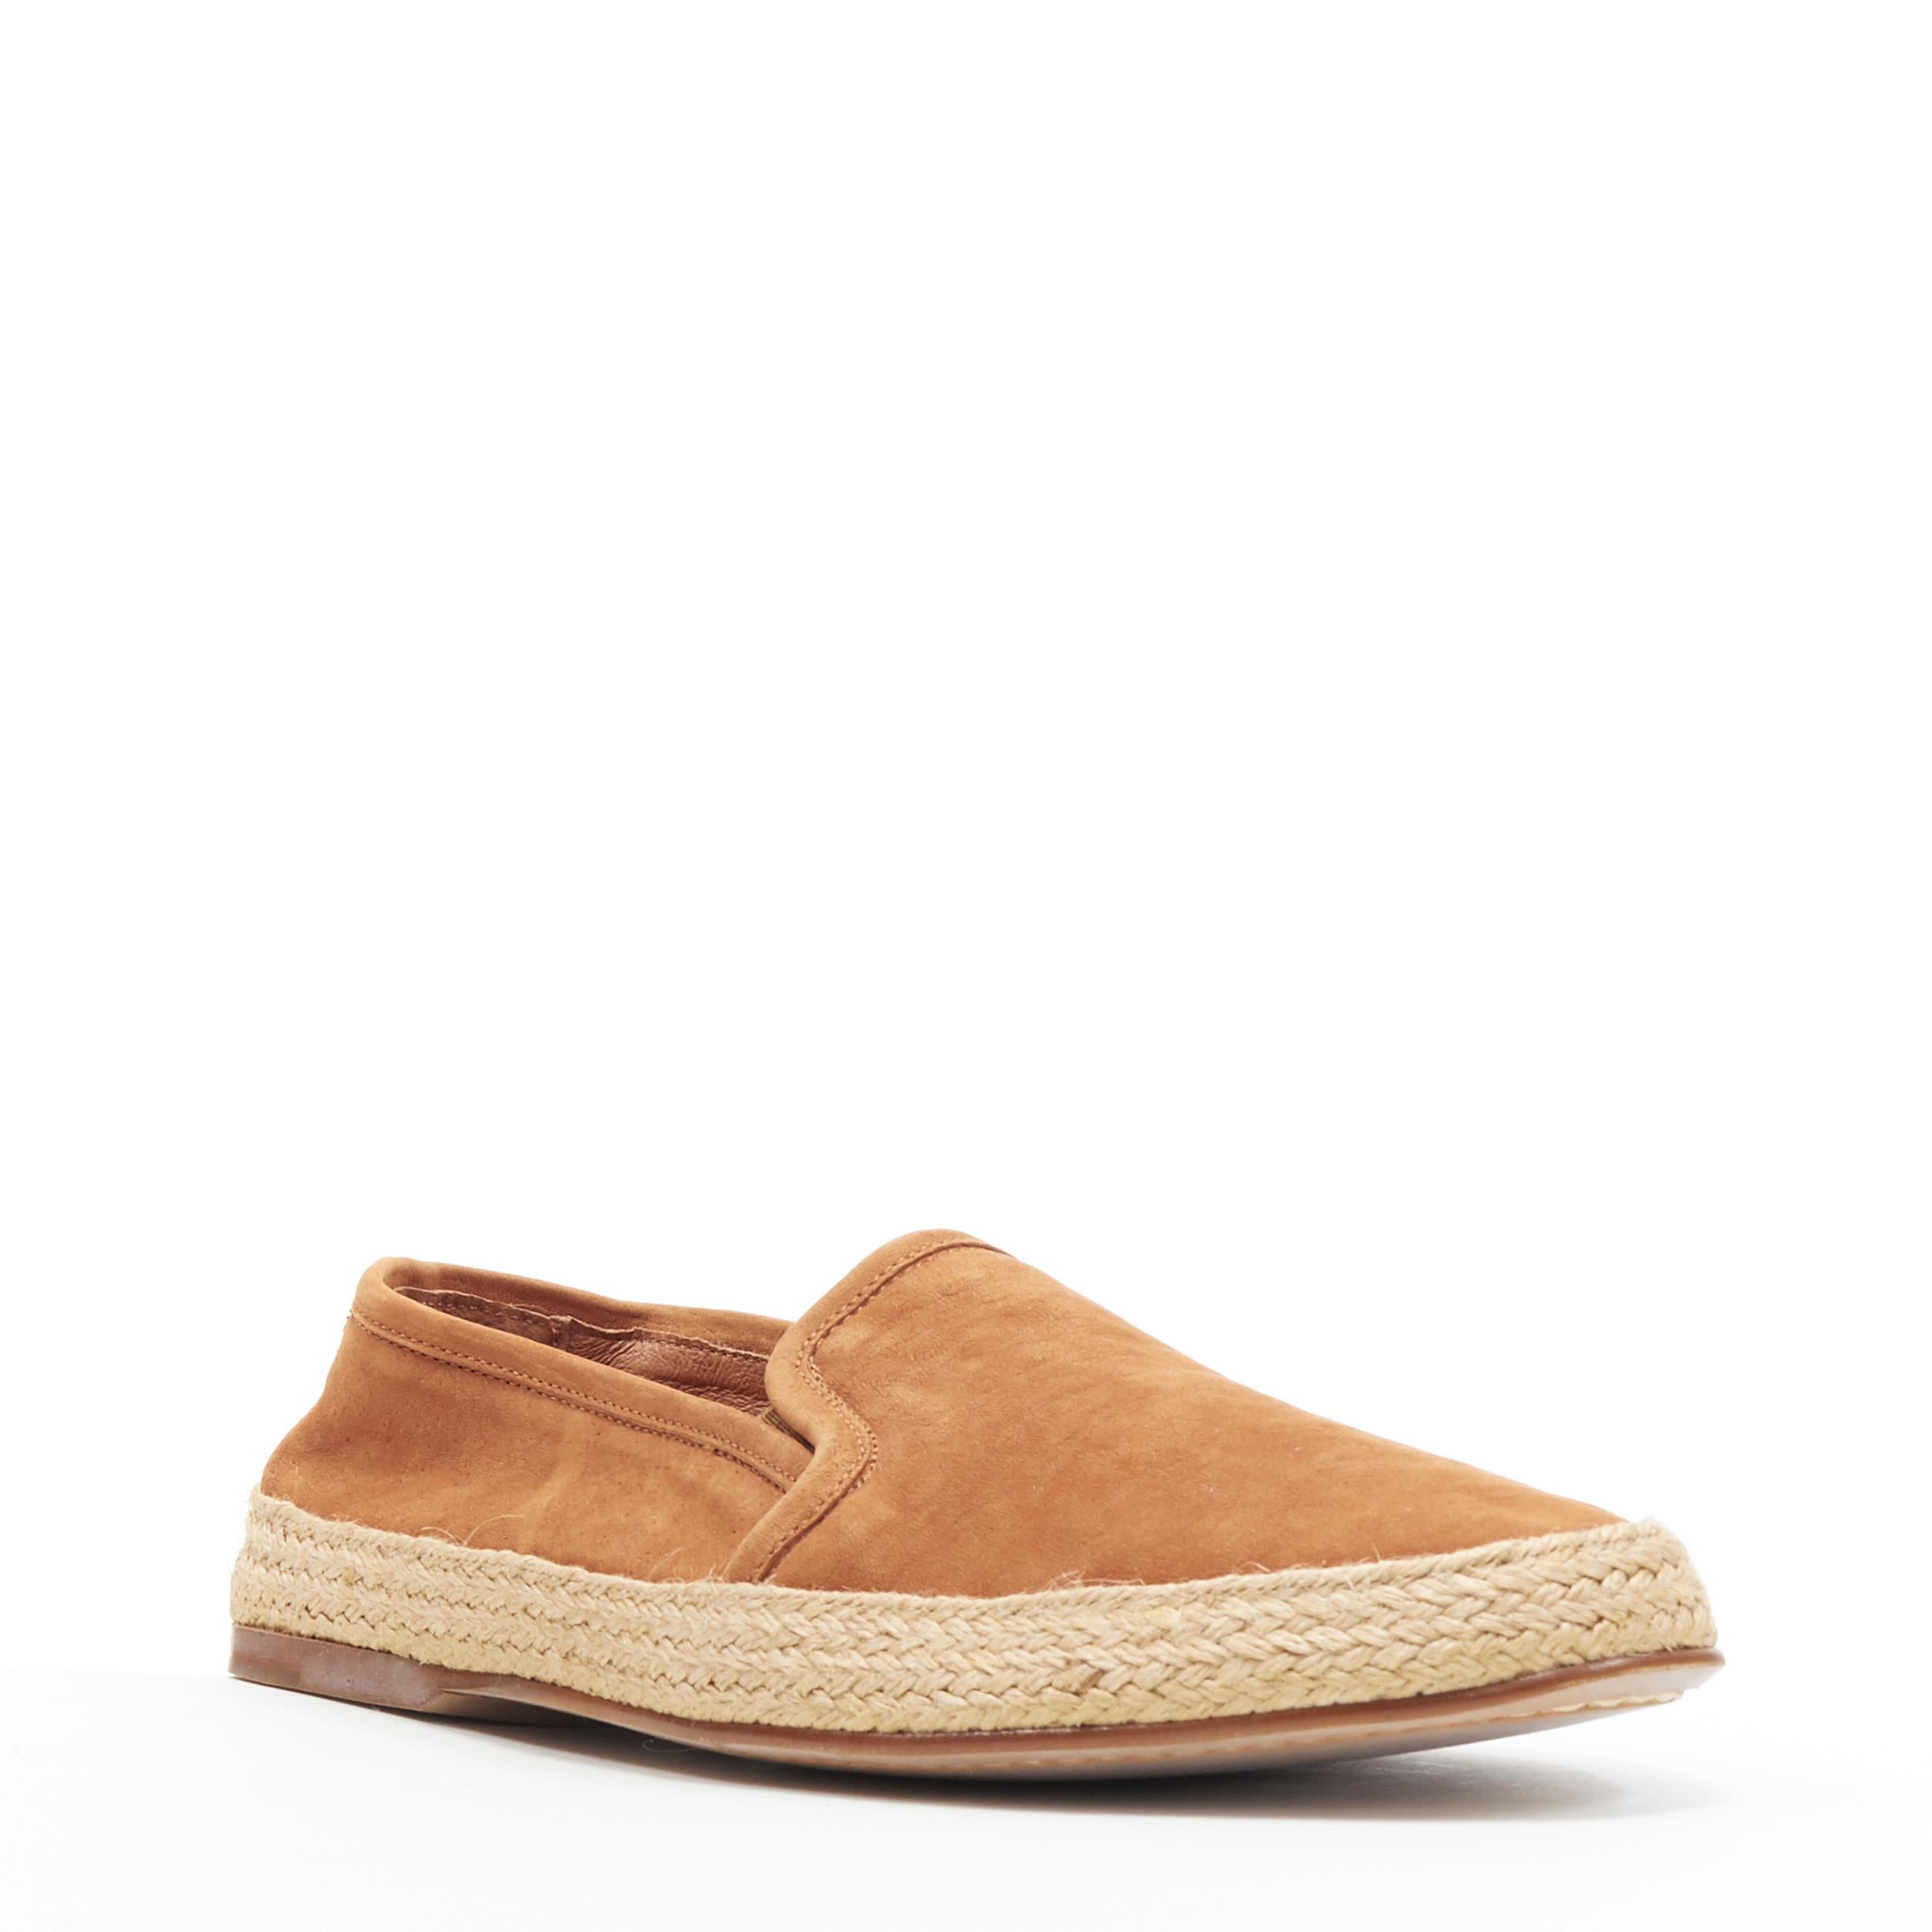 new LA PORTEGNA Dani Yute brandy brown jute espadrille slip on shoes EU41
Reference: TGAS/A05777
Brand: La Portegna
Model: Espadrille
Material: Suede
Color: Brown
Pattern: Solid
Extra Details: Brown suede leather upper. Jute sole. Stretch fit.
Made